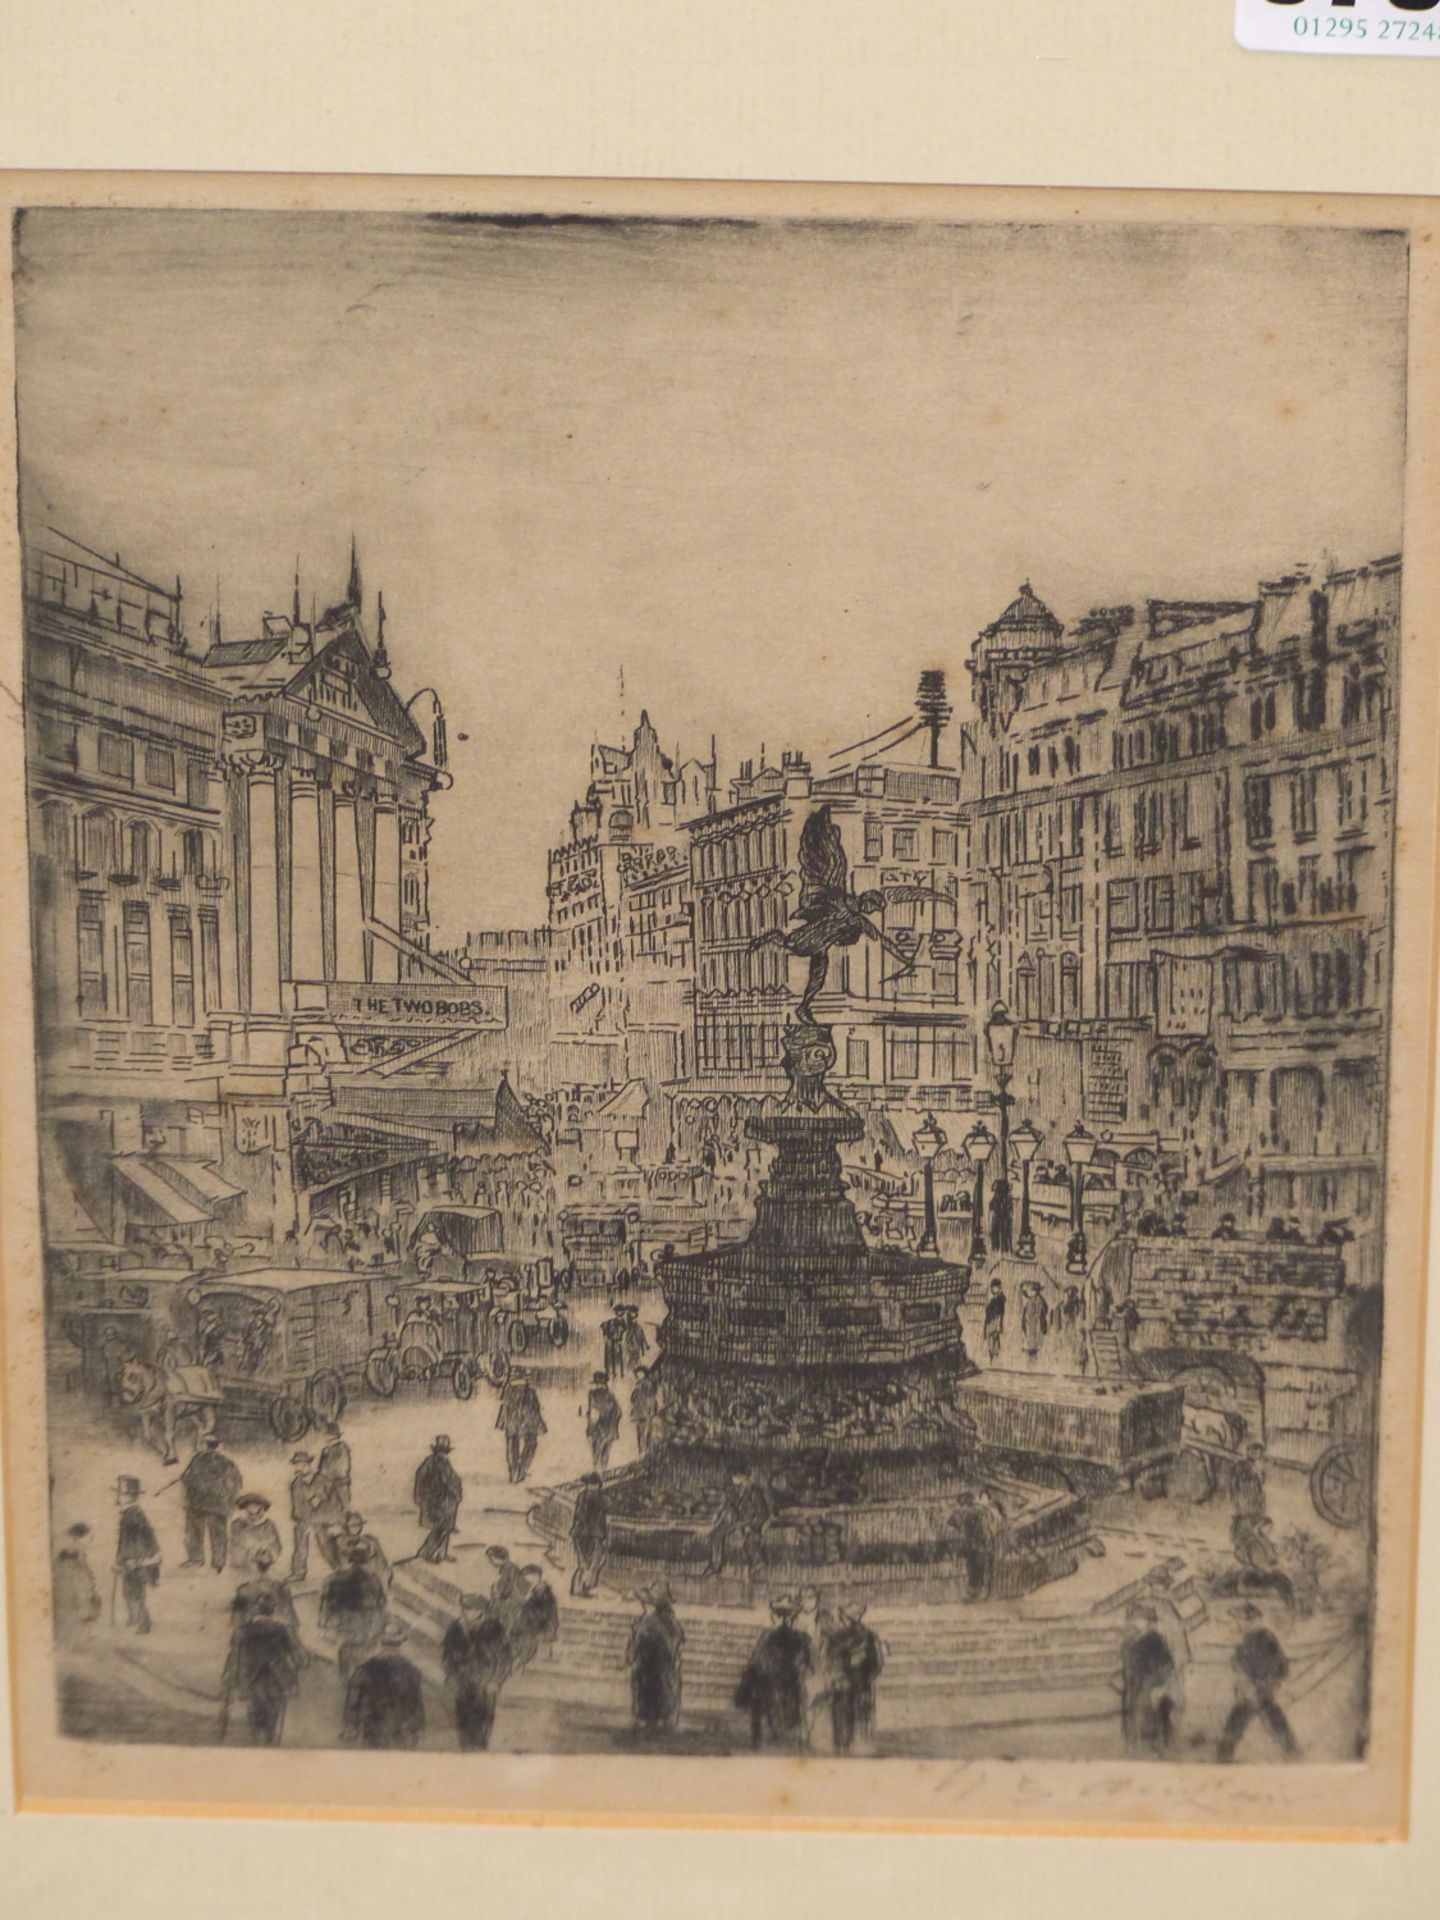 ** LAIDLAW? (EARLY 20TH CENTURY) TOWER BRIDGE LONDON & PICCADILLY CIRCUS. ETCHINGS. PENCIL SIGNED - Image 5 of 8